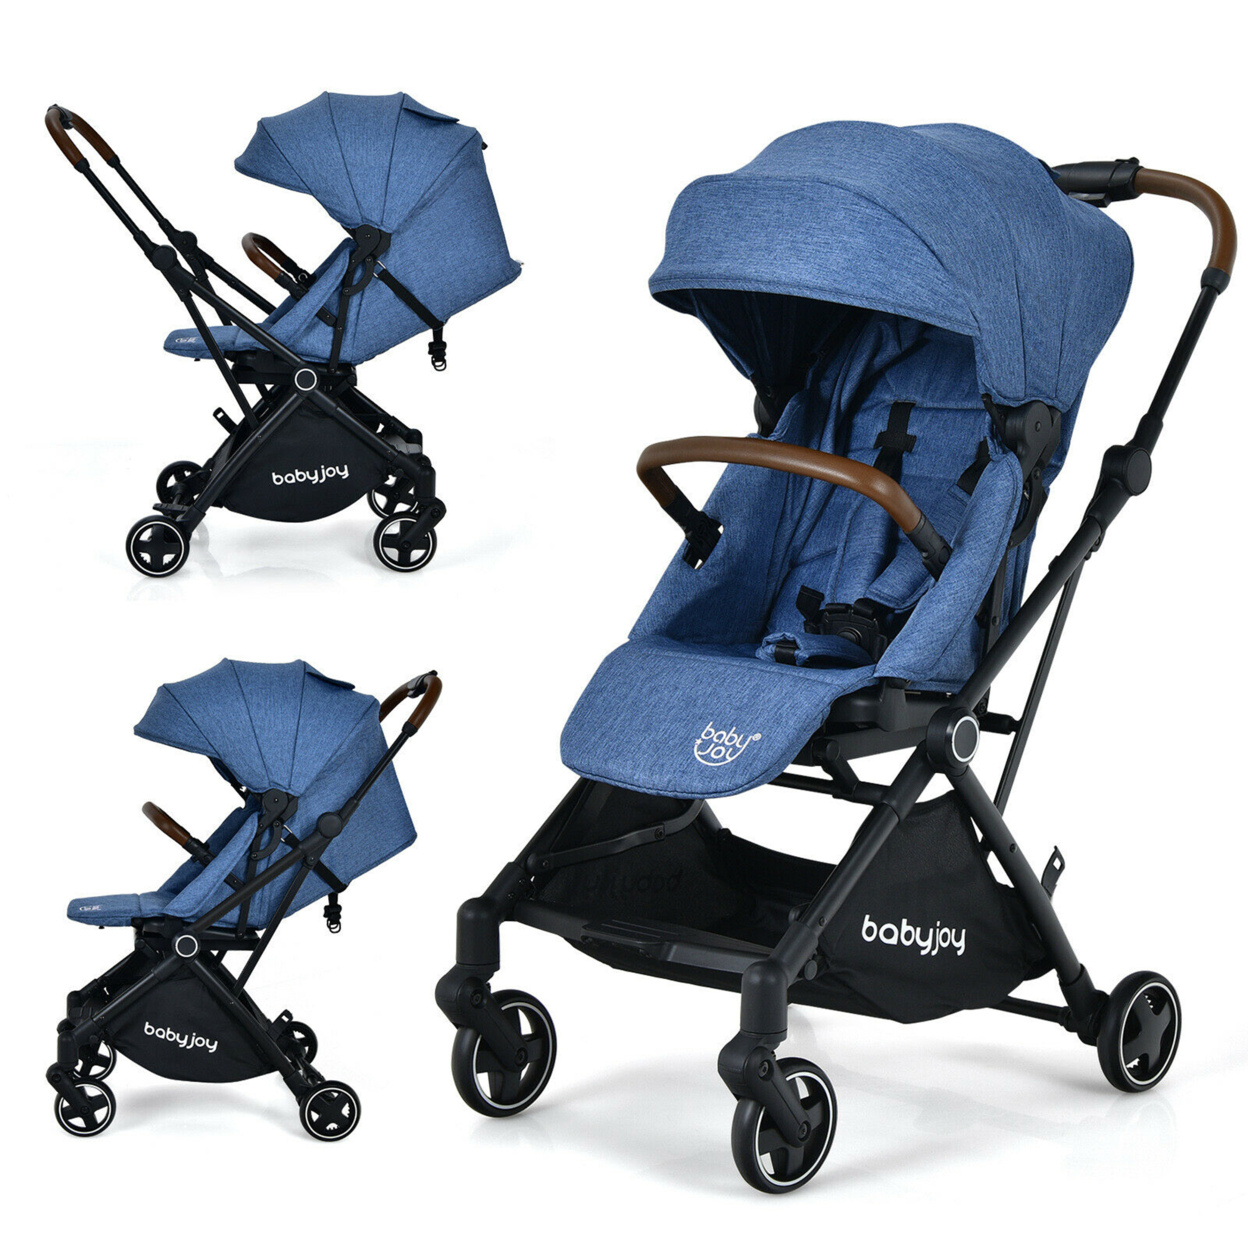 2-in-1 Convertible Baby Stroller Pushchair Aluminum W/ Adjustable Canopy - Blue